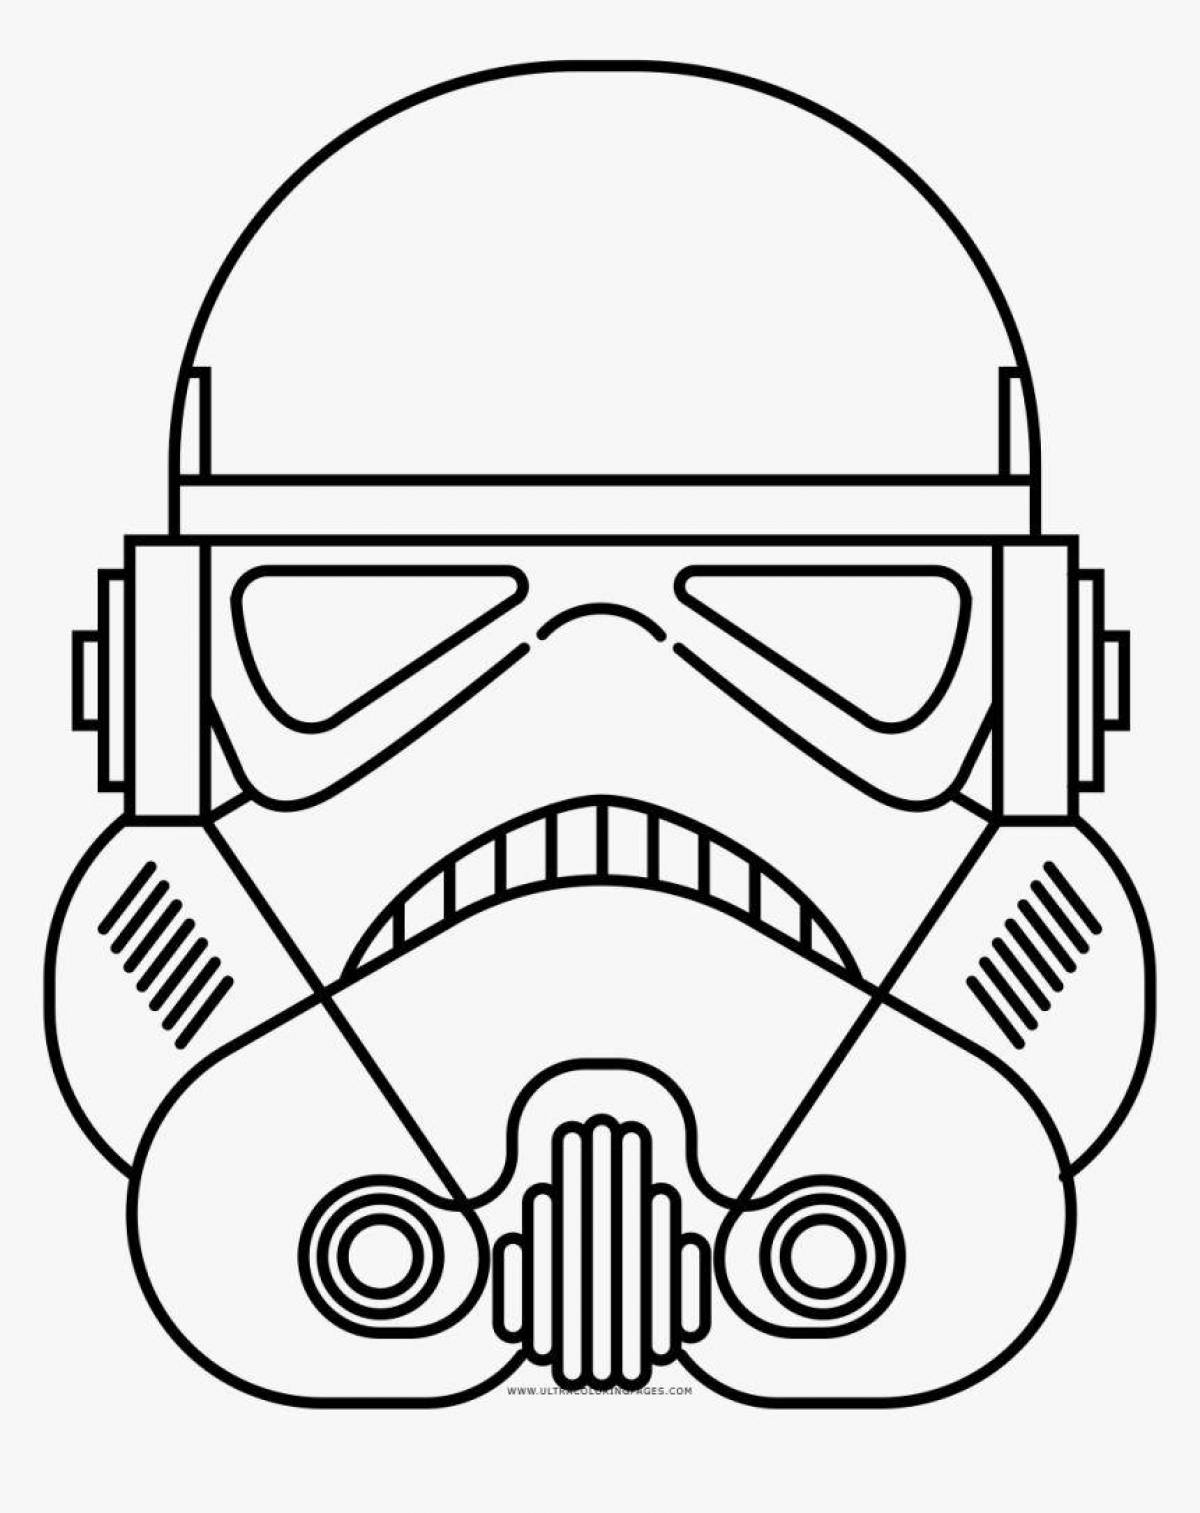 Awesome star wars stormtrooper coloring book